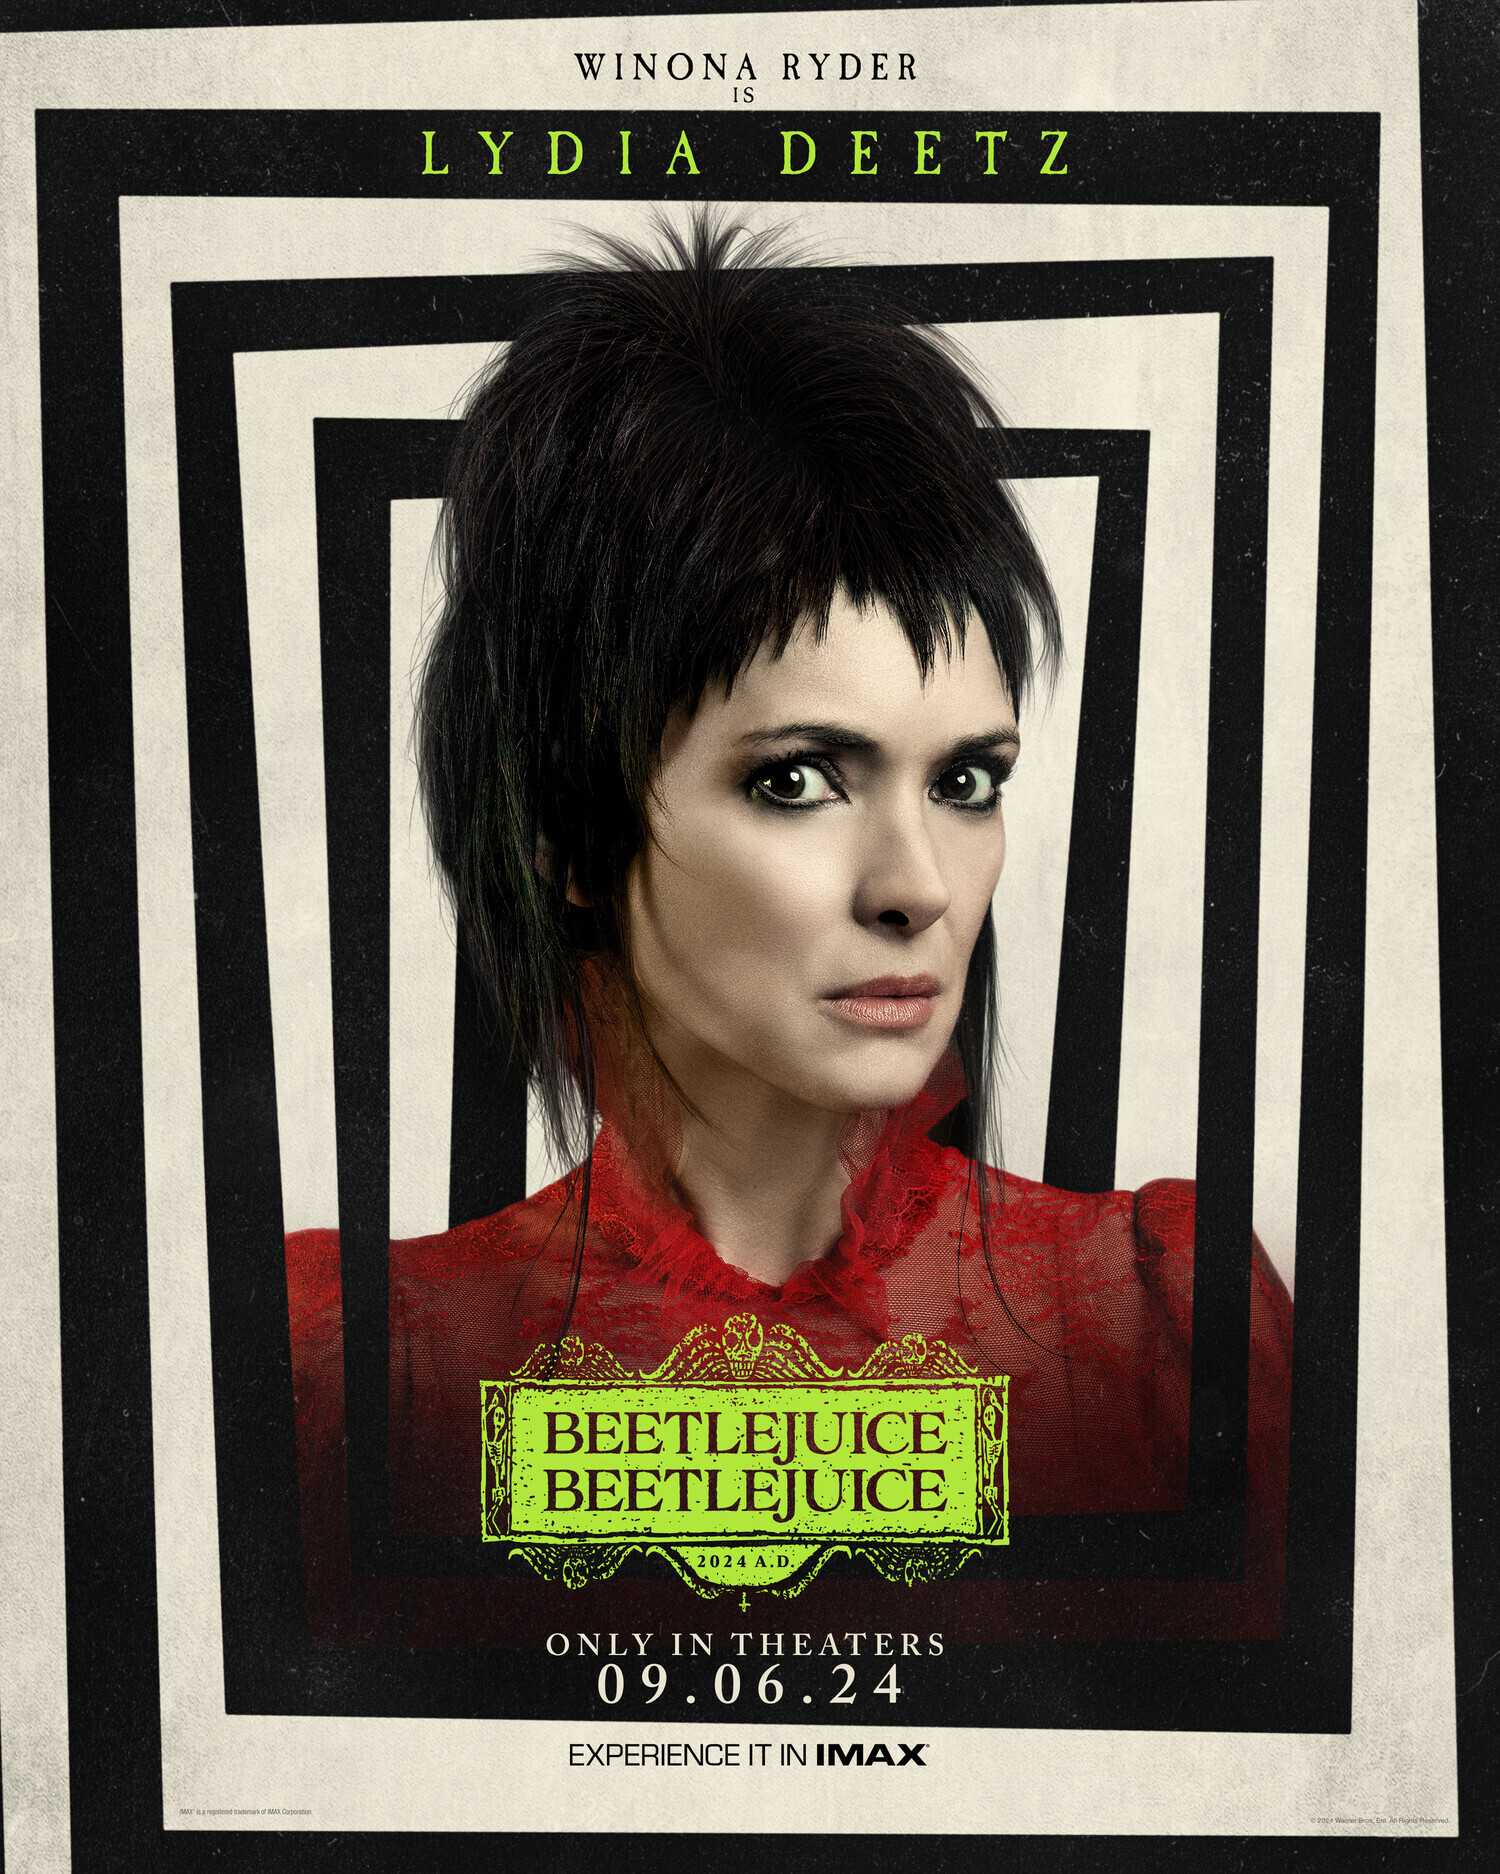 News on the film Beetlejuice Beetlejuice - news, Movies, Film and TV series news, Beetlejuice, USA, Warner brothers, Poster, Trailer, Comedy, Fantasy, Horror, Screen adaptation, Continuation, Tim Burton, Humor, Black humor, Director, Actors and actresses, Roles, Plot, Video, Youtube, Longpost